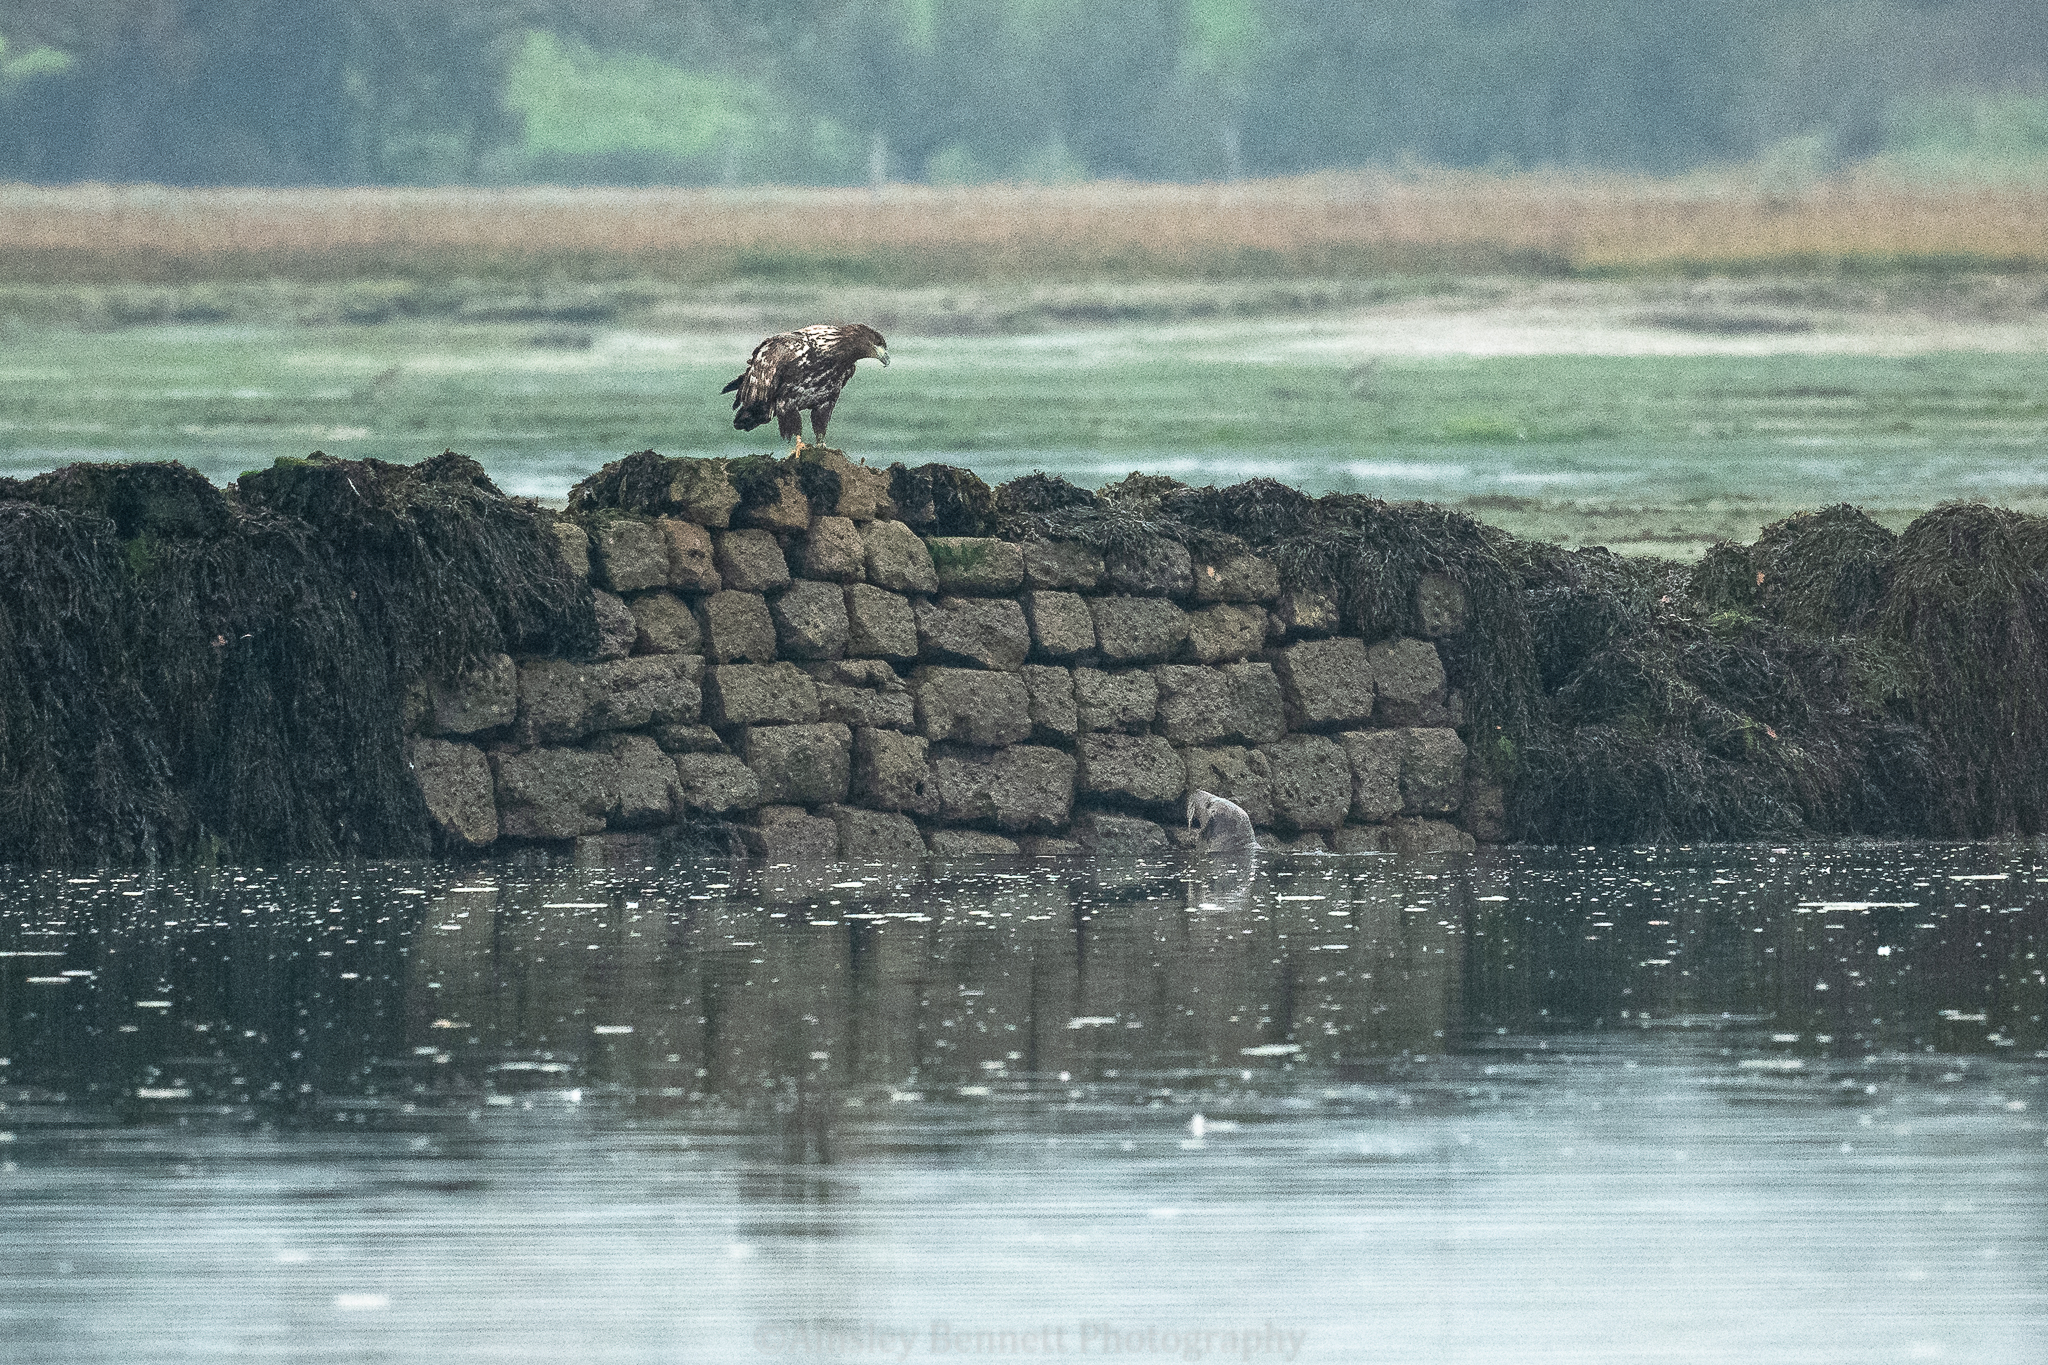 One of the eagles on sea wall watches a seal in the water below